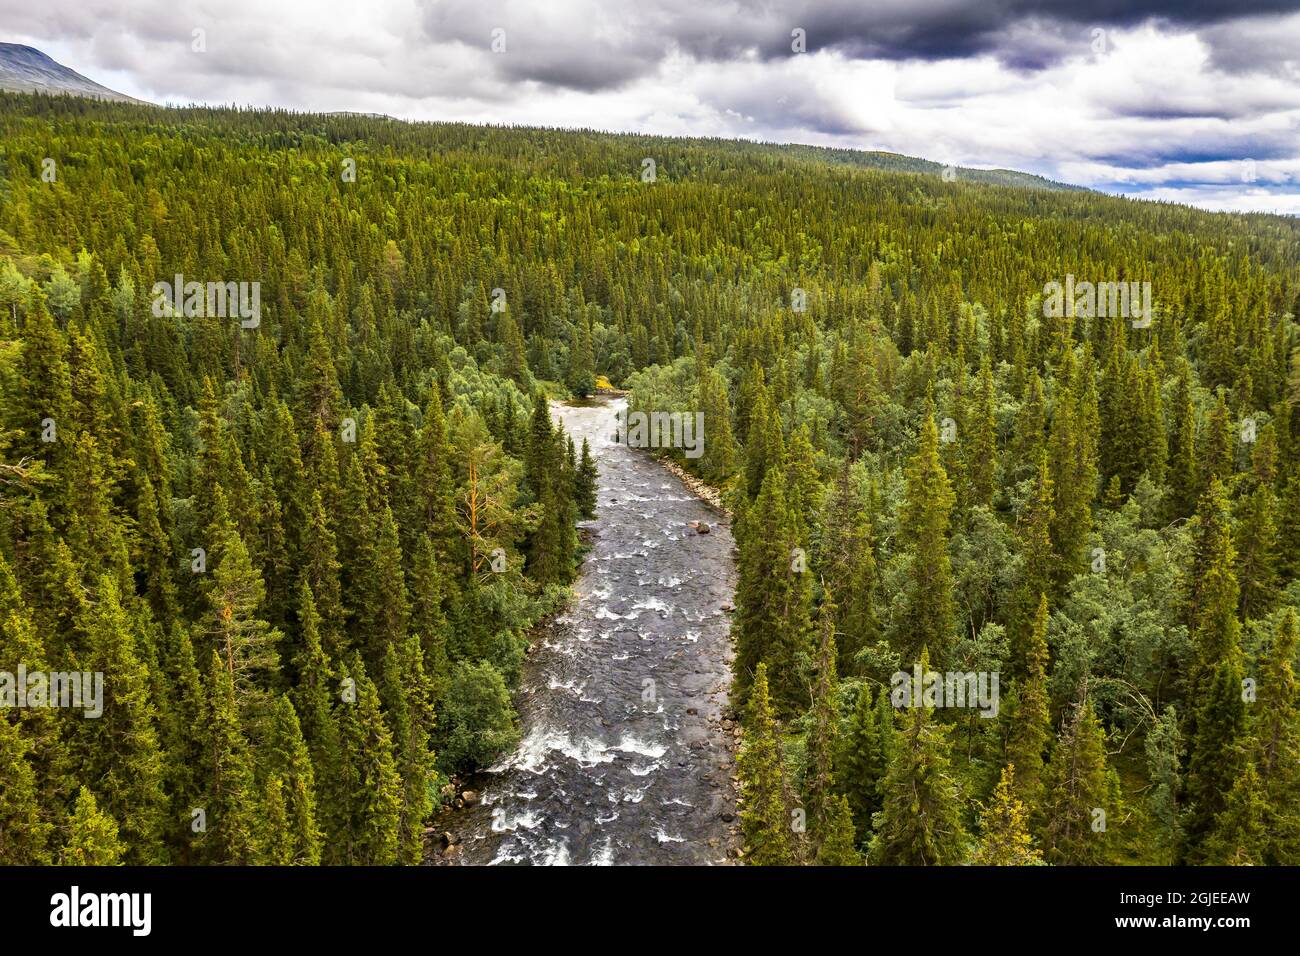 Mountain stream through coniferous forest in the Ljungdal mountains (Swedish: Ljungdalsfjallen). Photo: Helikopterfoto / TT / code 11488 Stock Photo